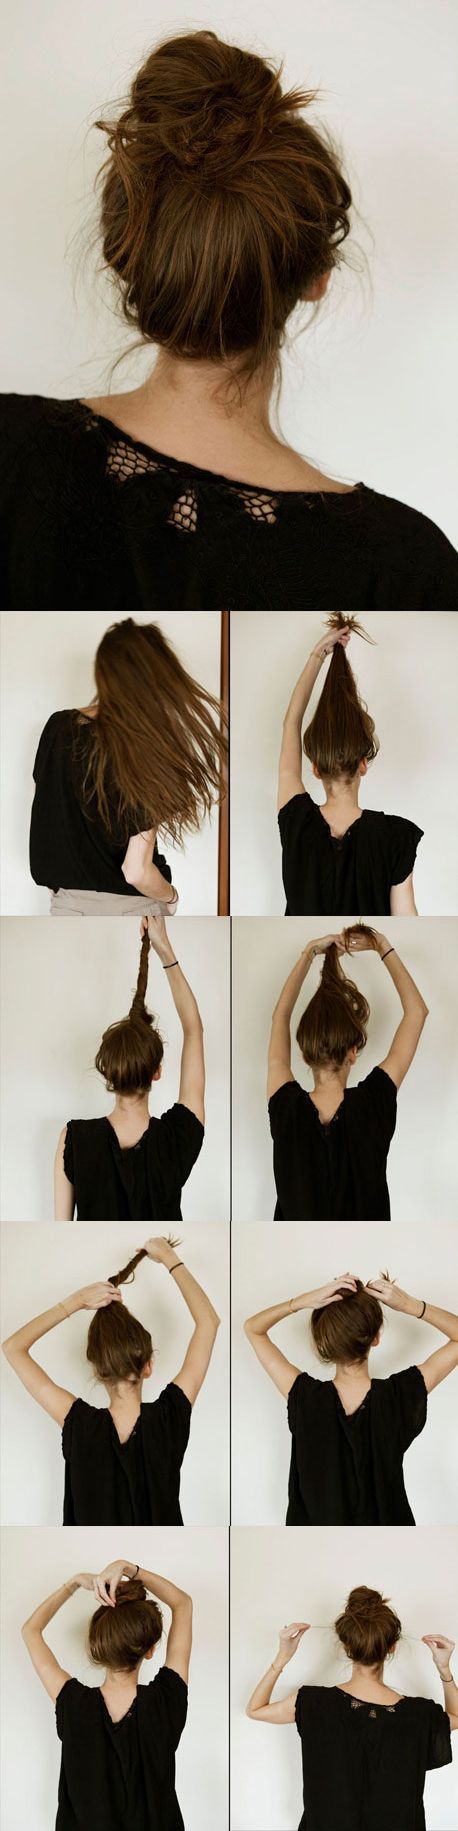 Super Easy Knotted Bun Updo and Simple Bun #Hairstyle Tutorials